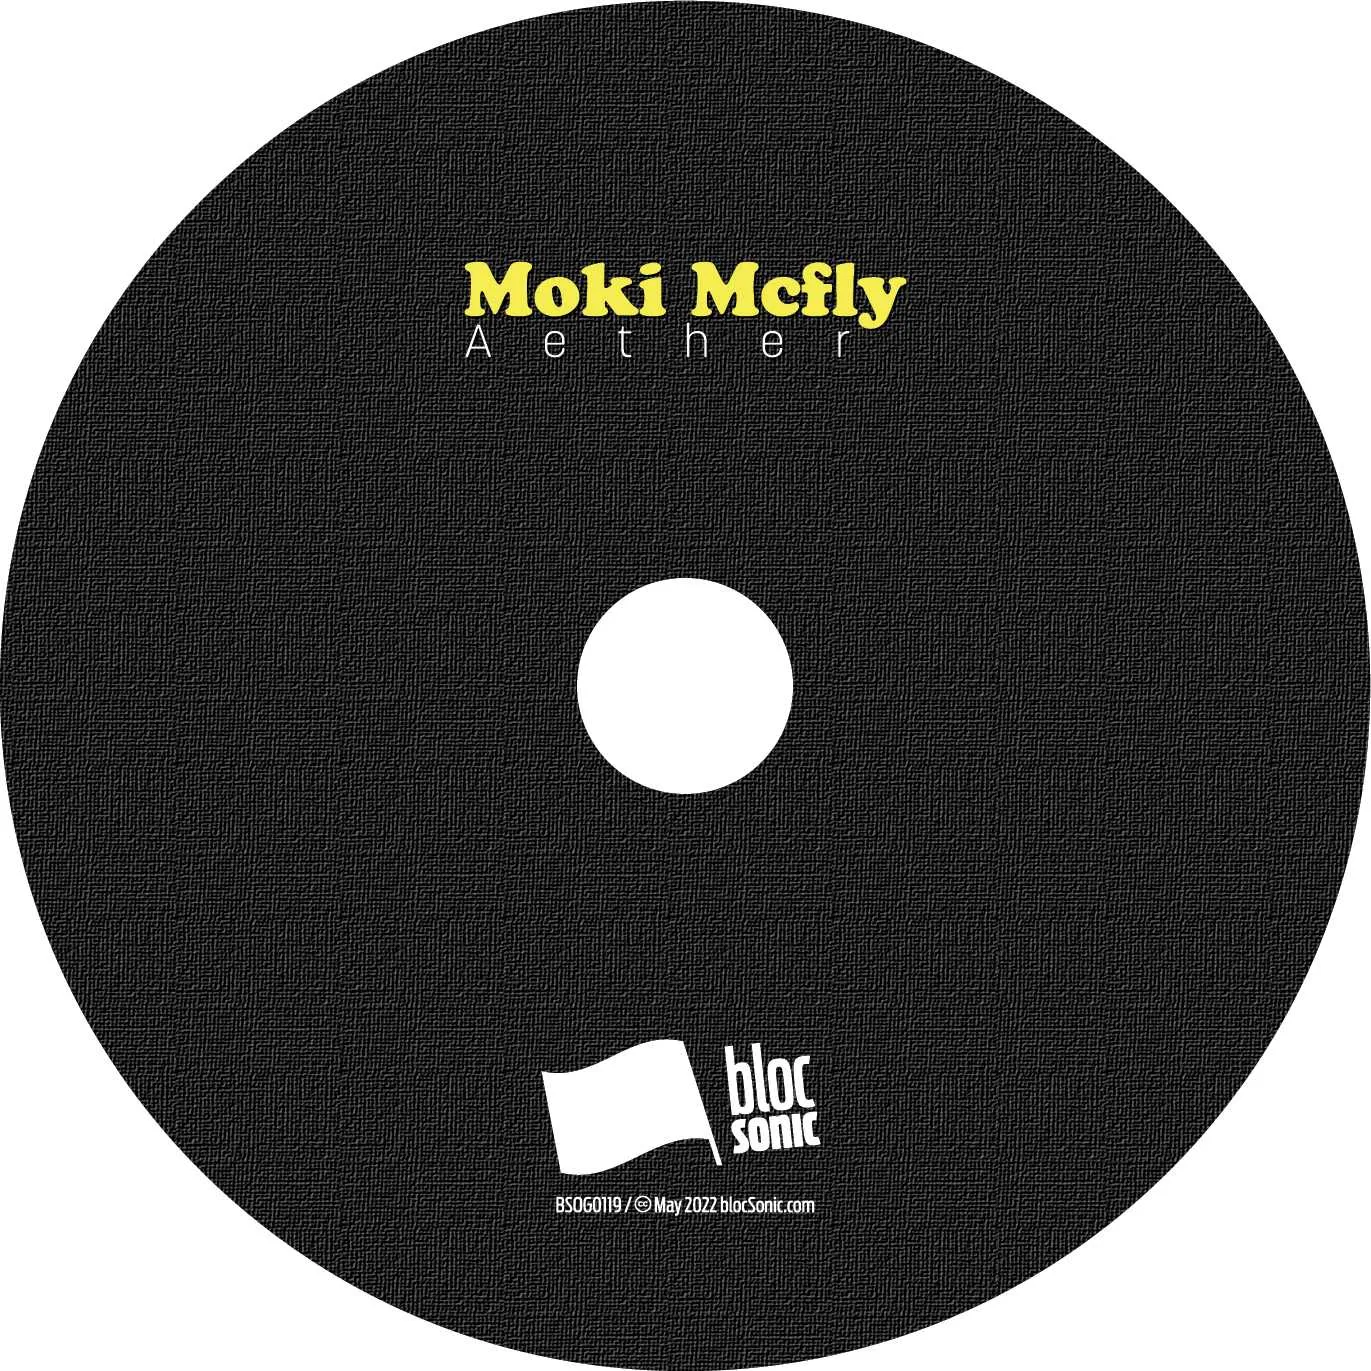 Album disc for “Aether” by Moki Mcfly